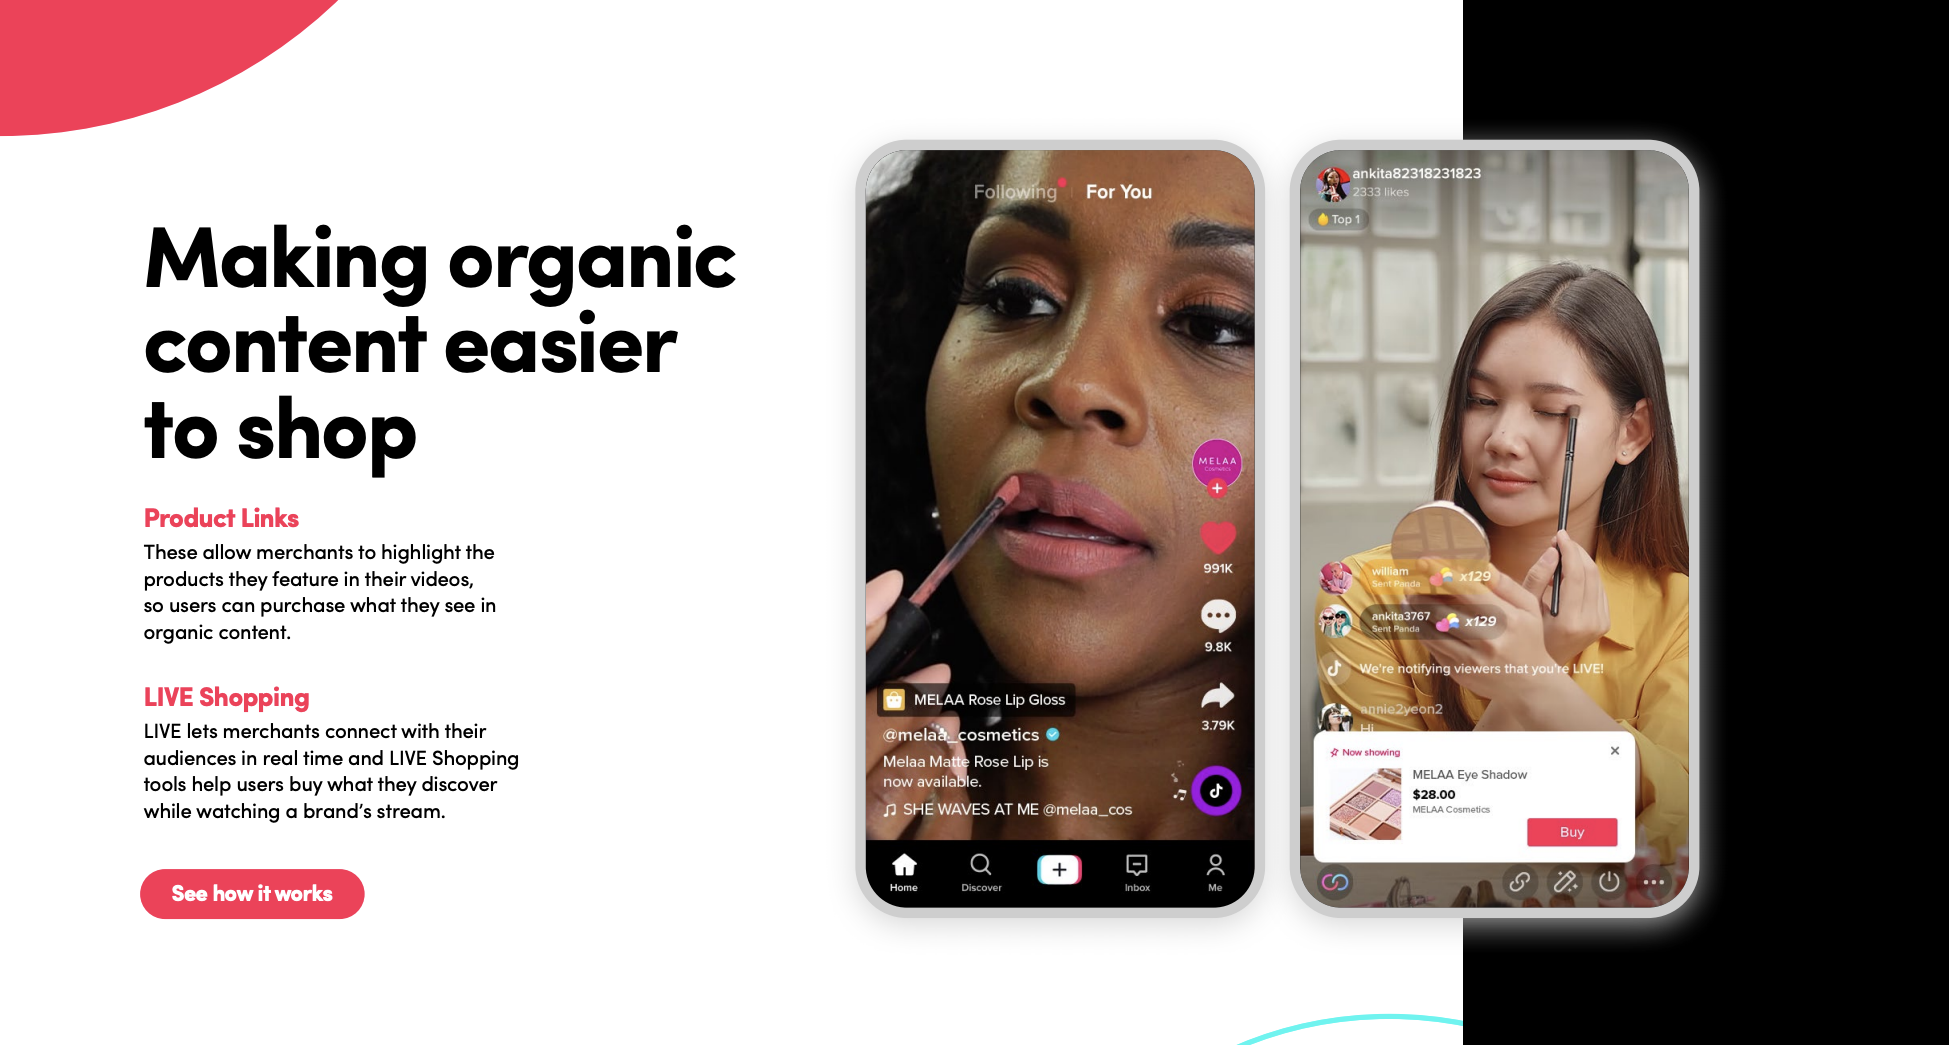 New features for live shopping on TikTok.